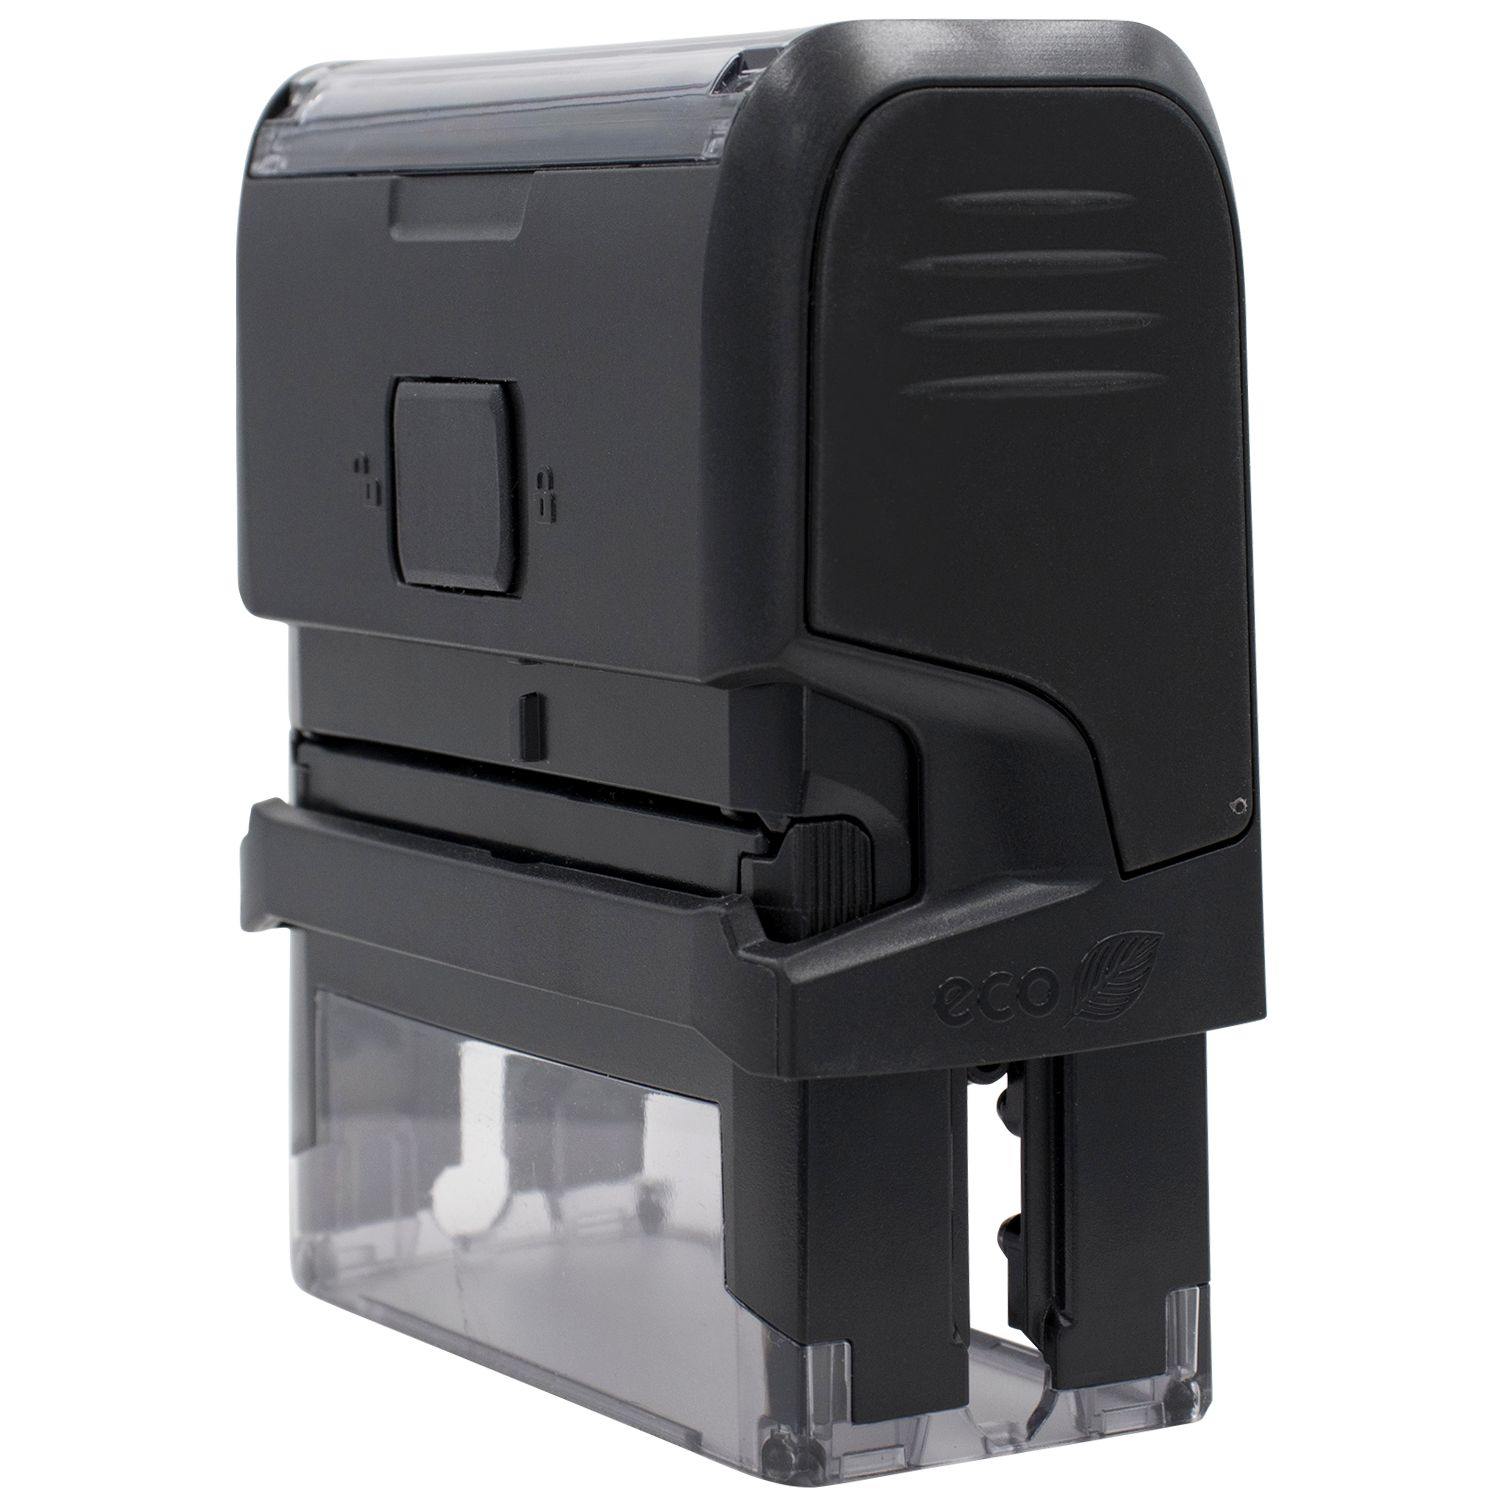 Side View of Large Self Inking Closed Stamp at an Angle